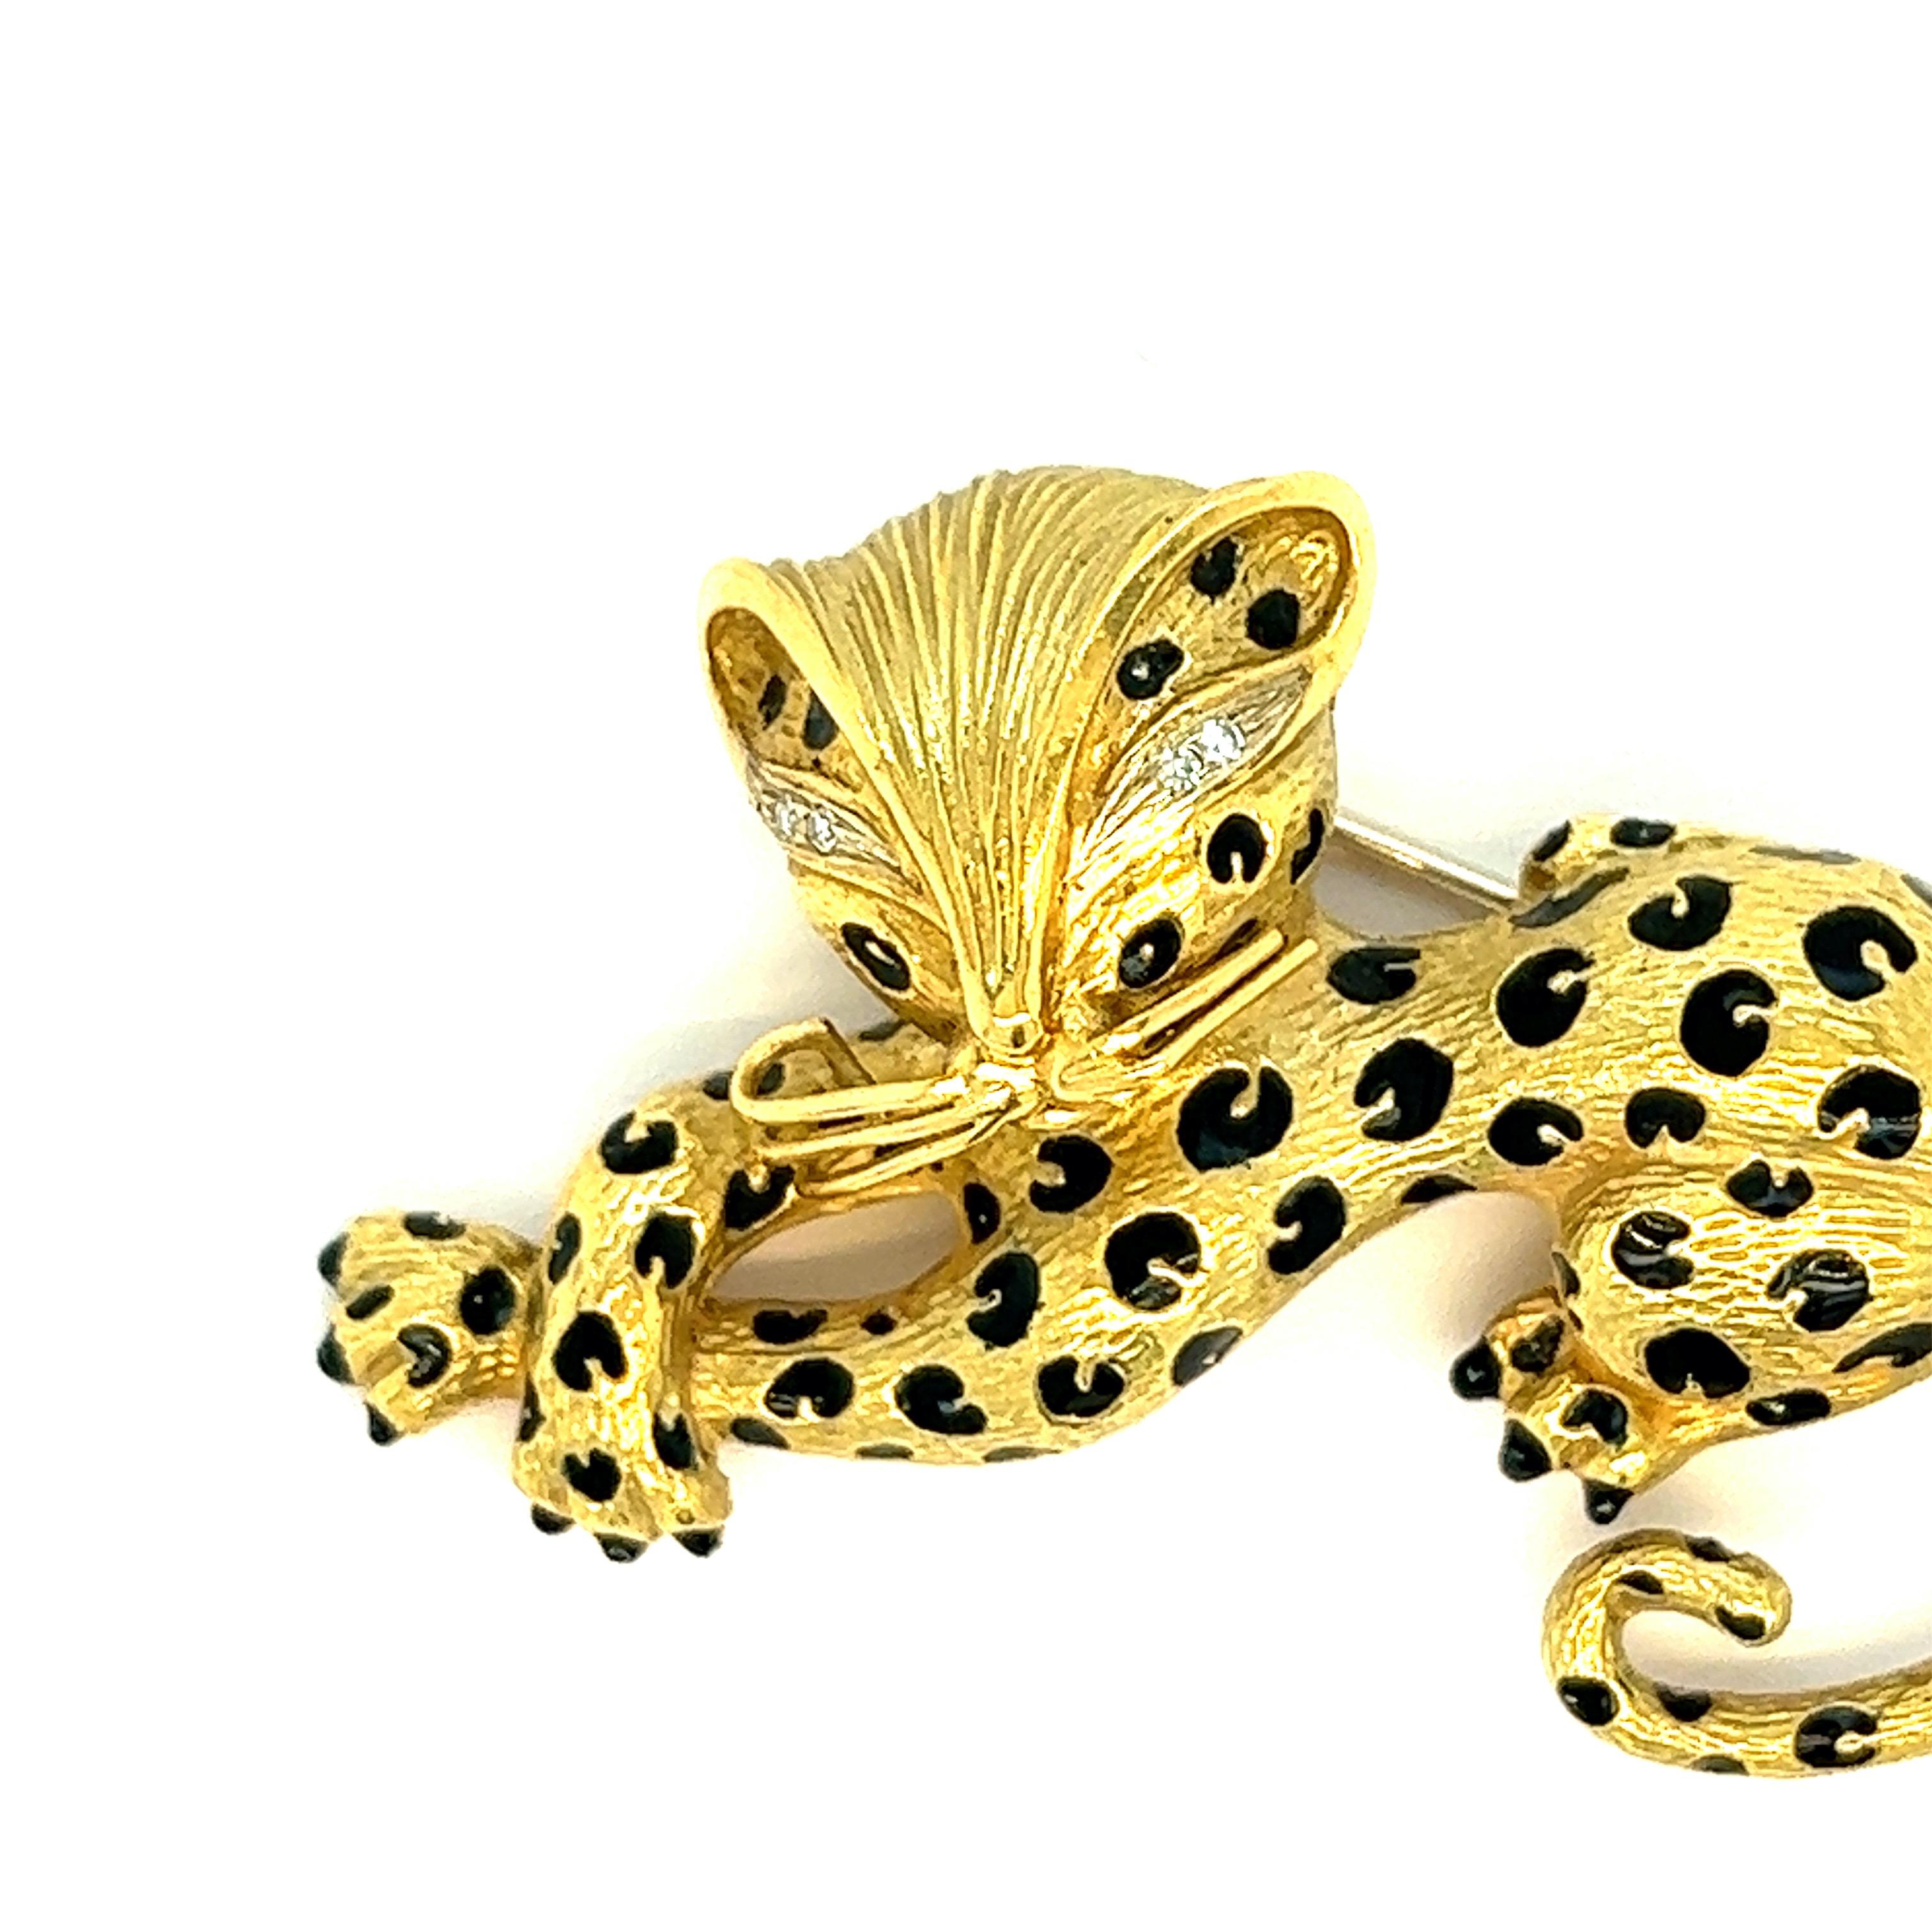 Cheetah black enamel gold brooch

Cheetah motif with black enamel spots, eyes are made out of small round-cut diamonds, 18 karat yellow gold; marked 18KT, HB, 4341

Size: width 2.25 inches, length 1.5 inches
Total weight: 30.4 grams 